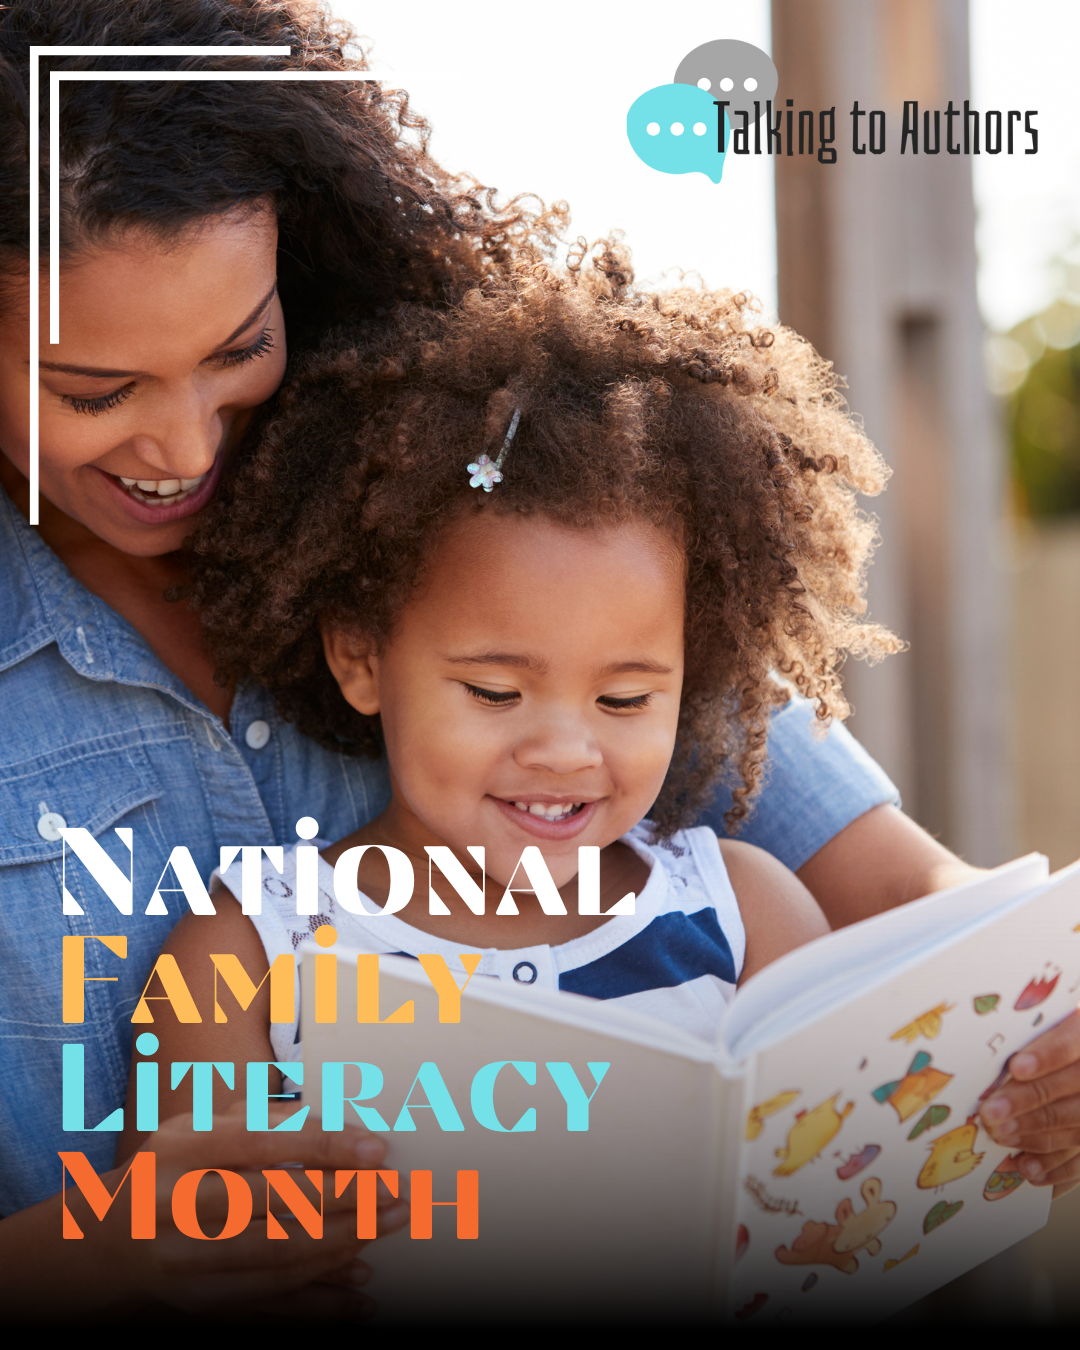 How to Celebrate National Family Literacy Month